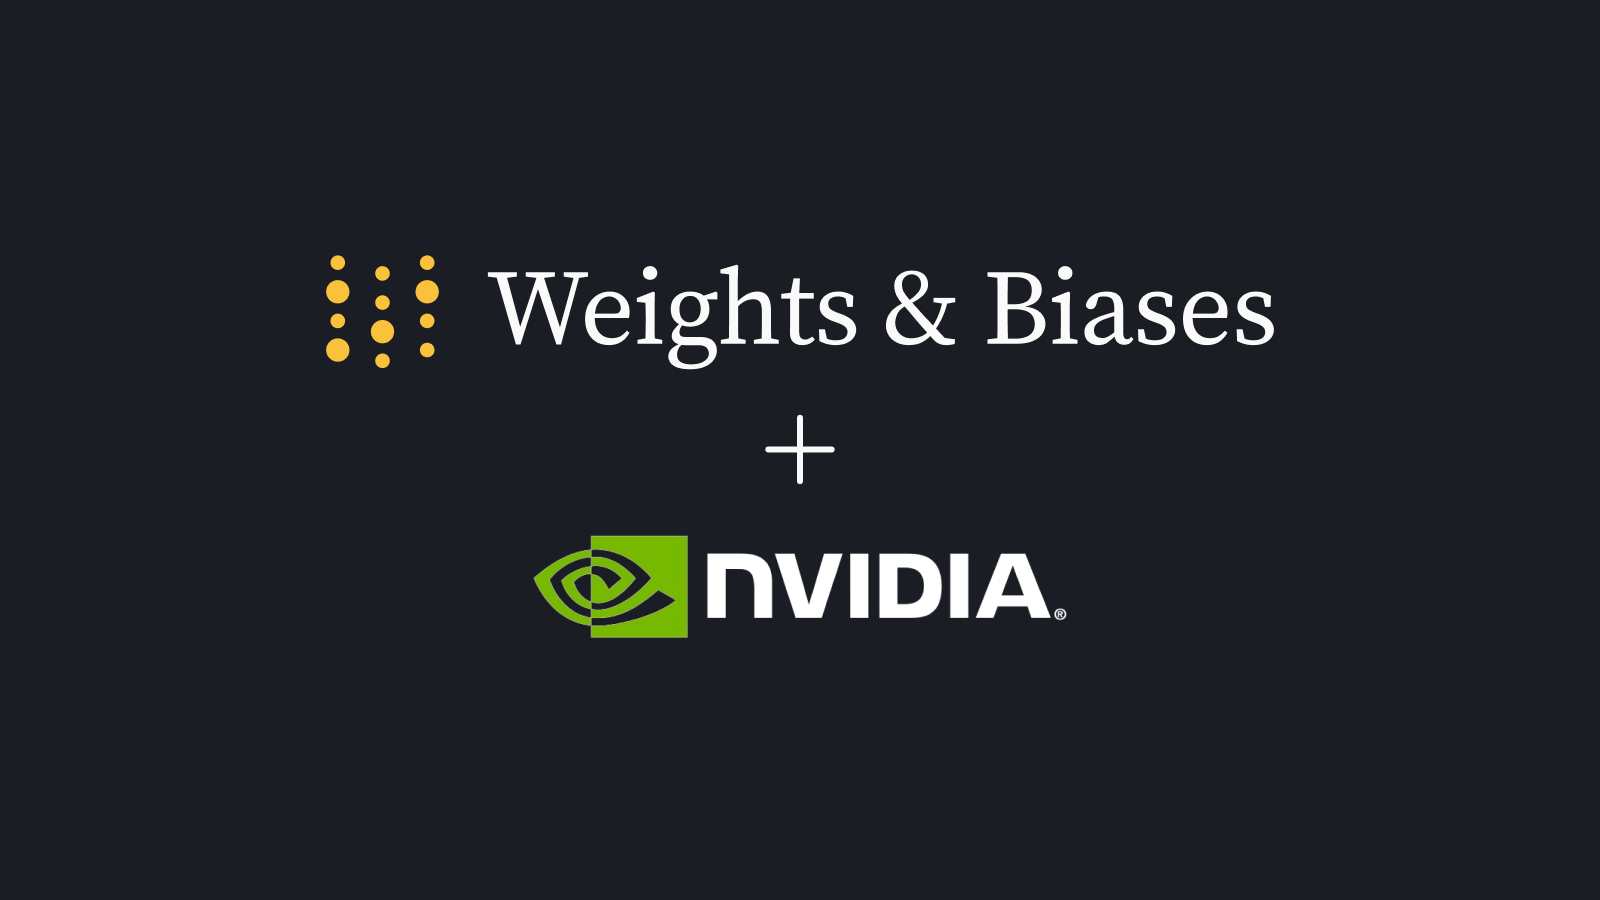 Weights & Biases + NVIDIA